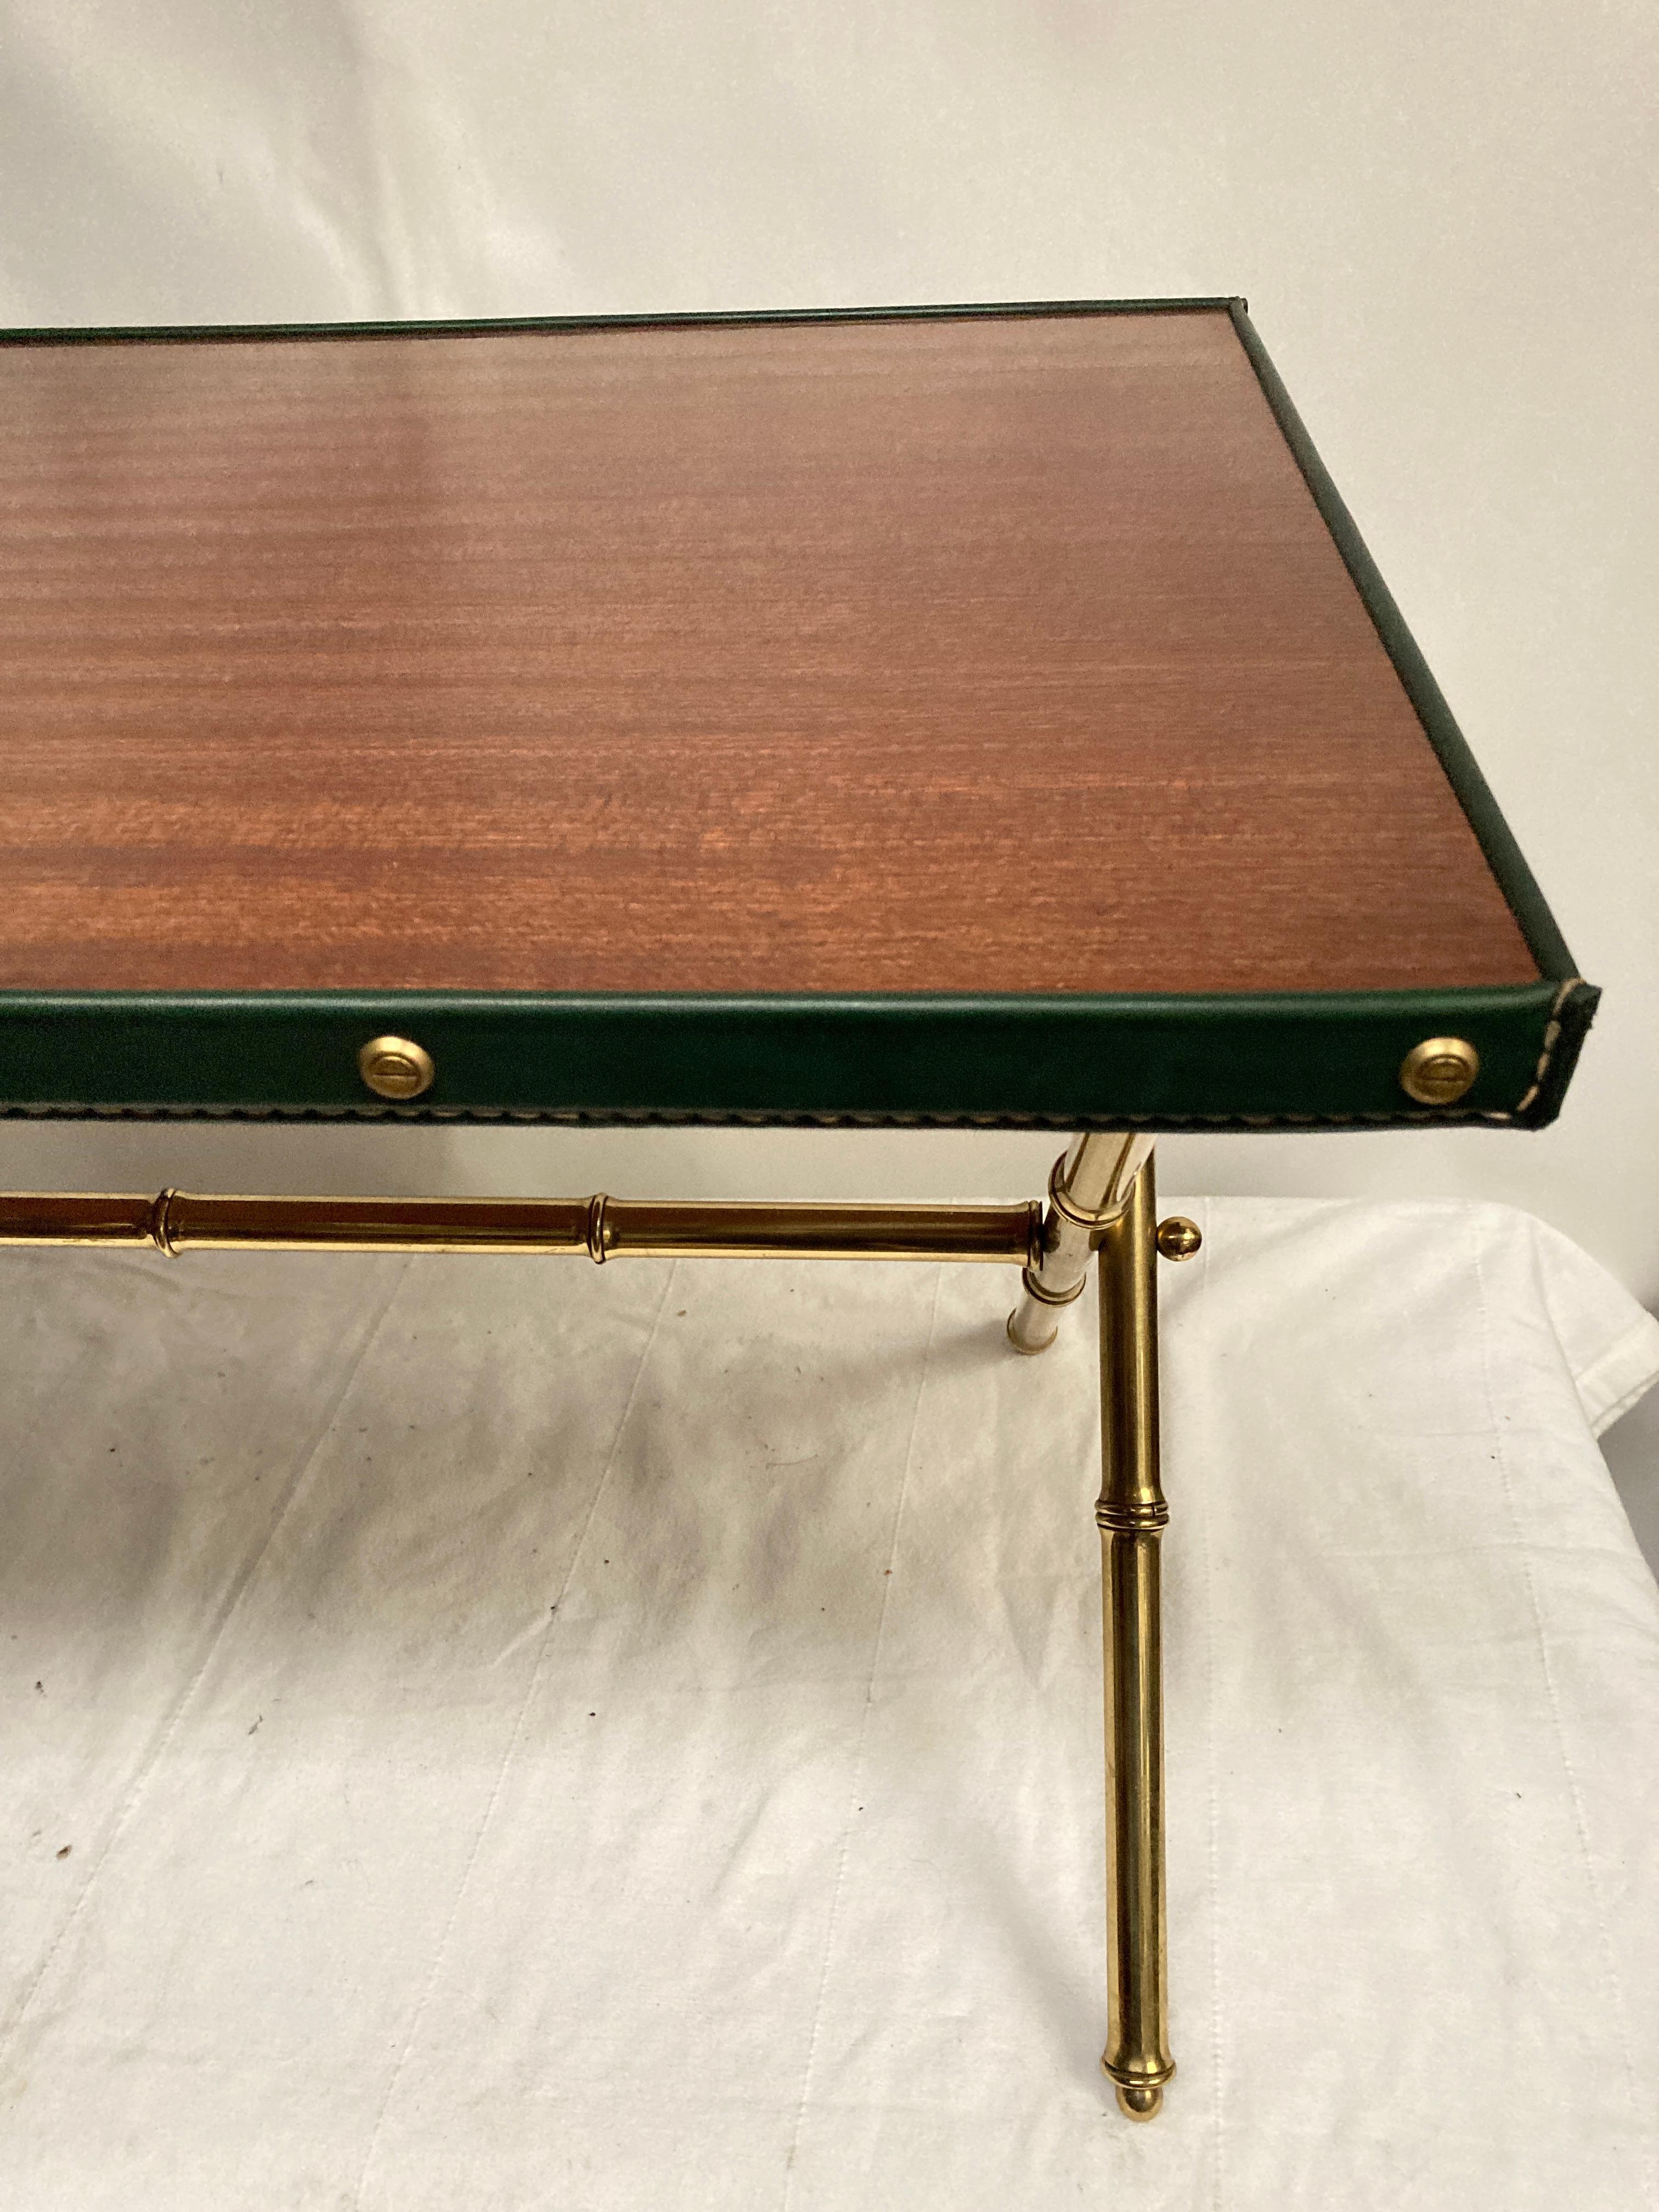 1950's Stitched leather cocktail table or side table
Brass bambou feet . Green leather
Great condition
